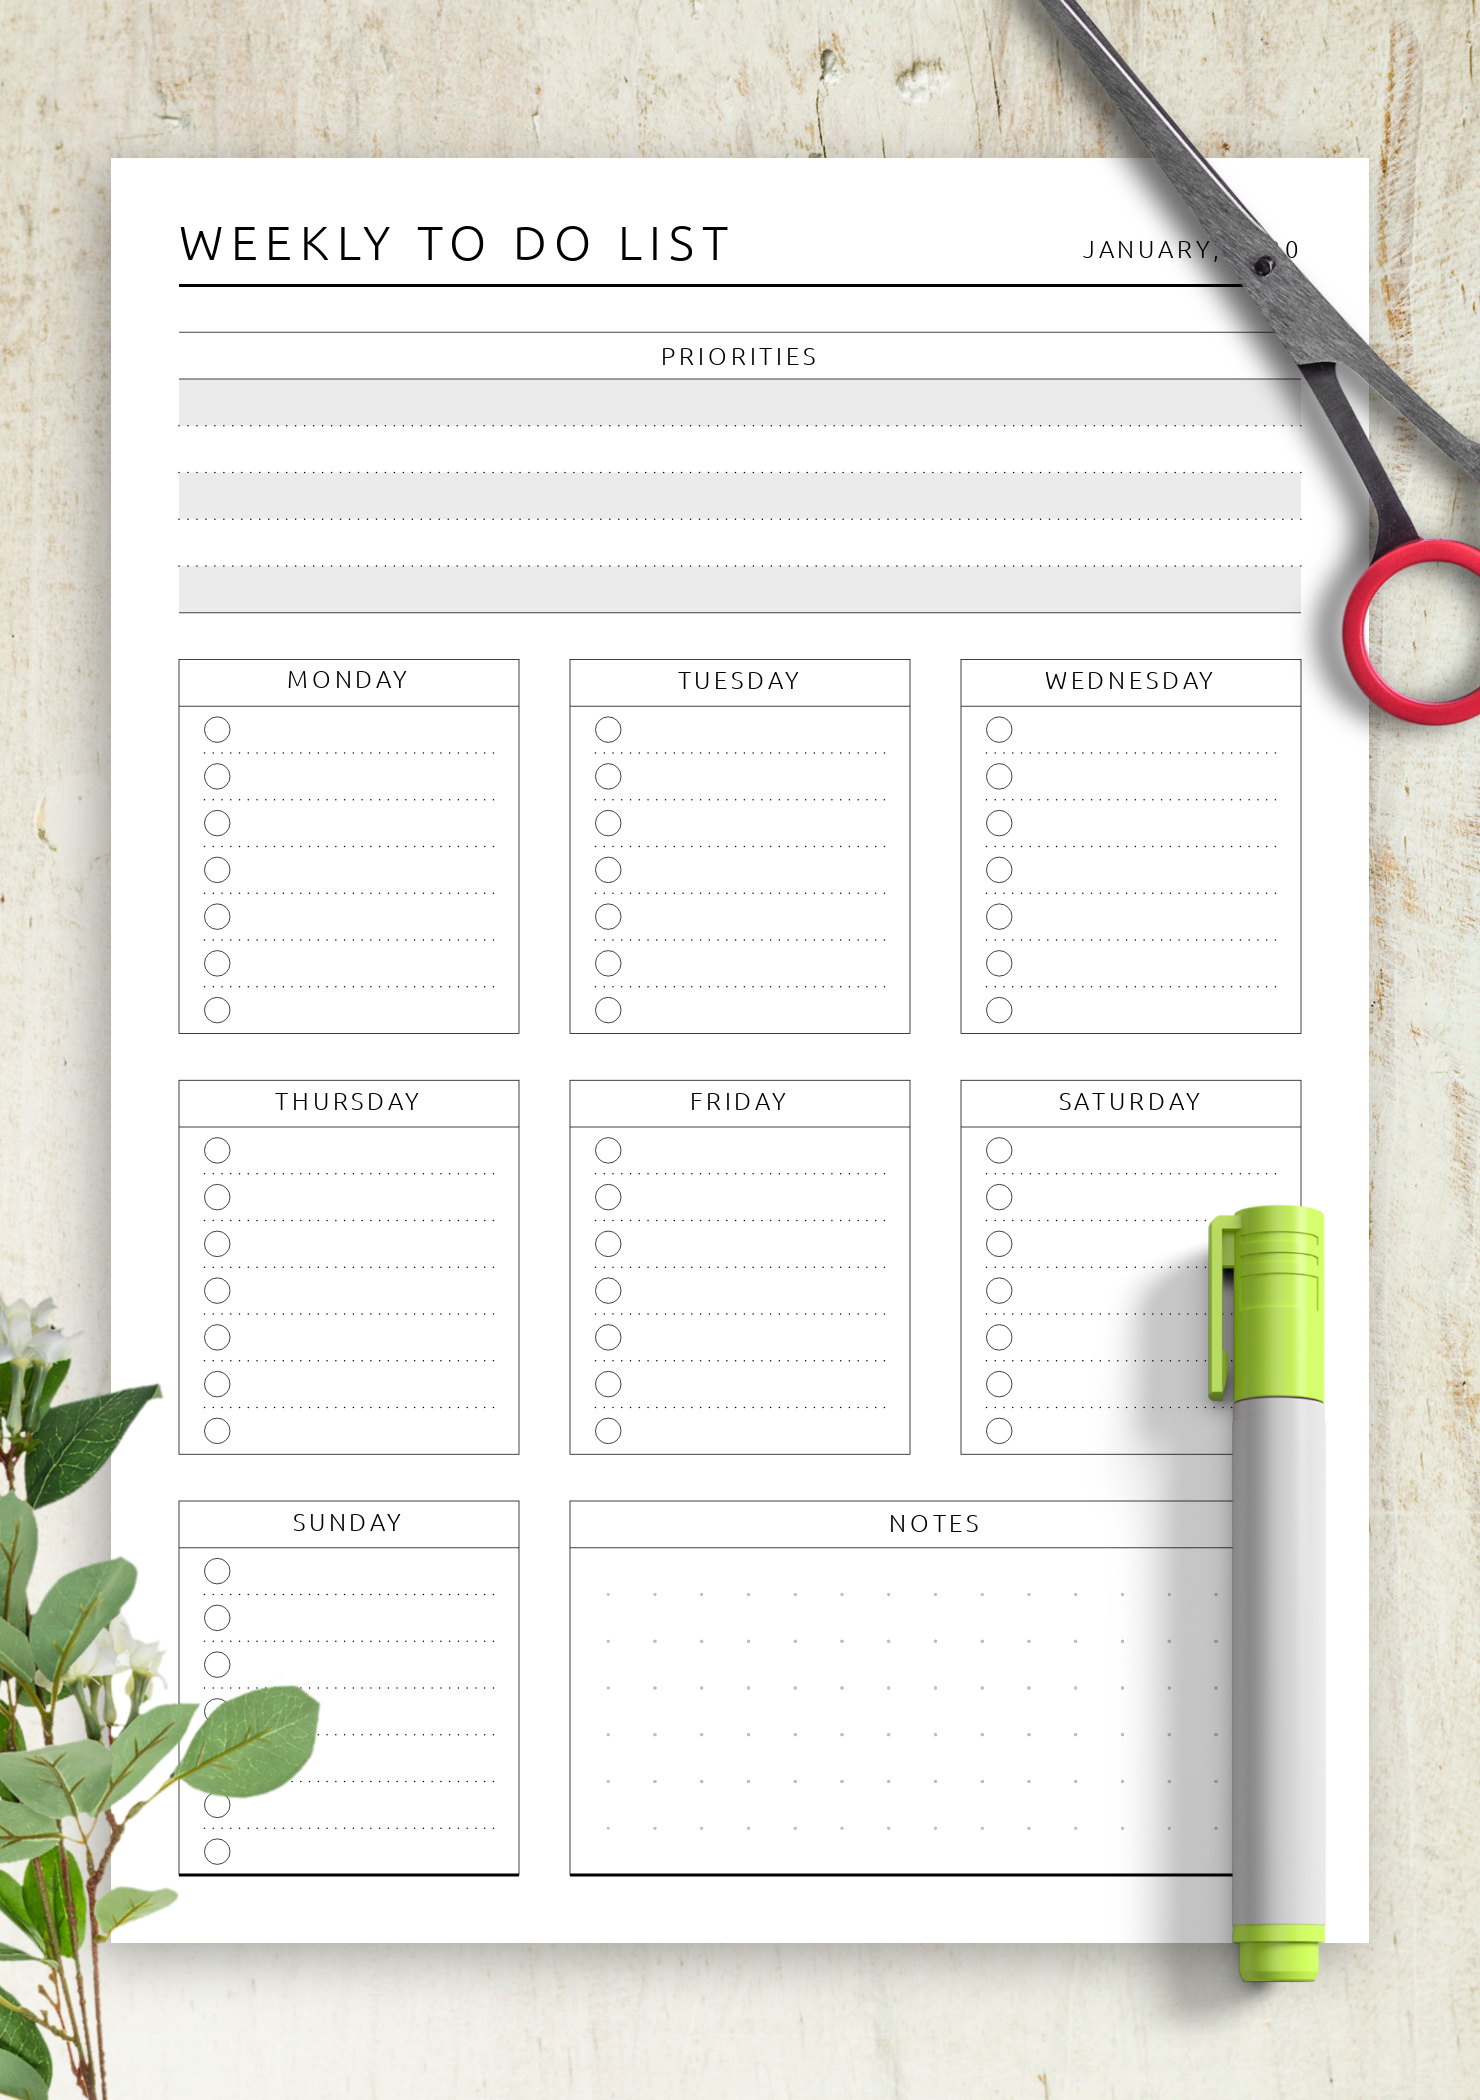 Weekly To Do List - Original Style PDF